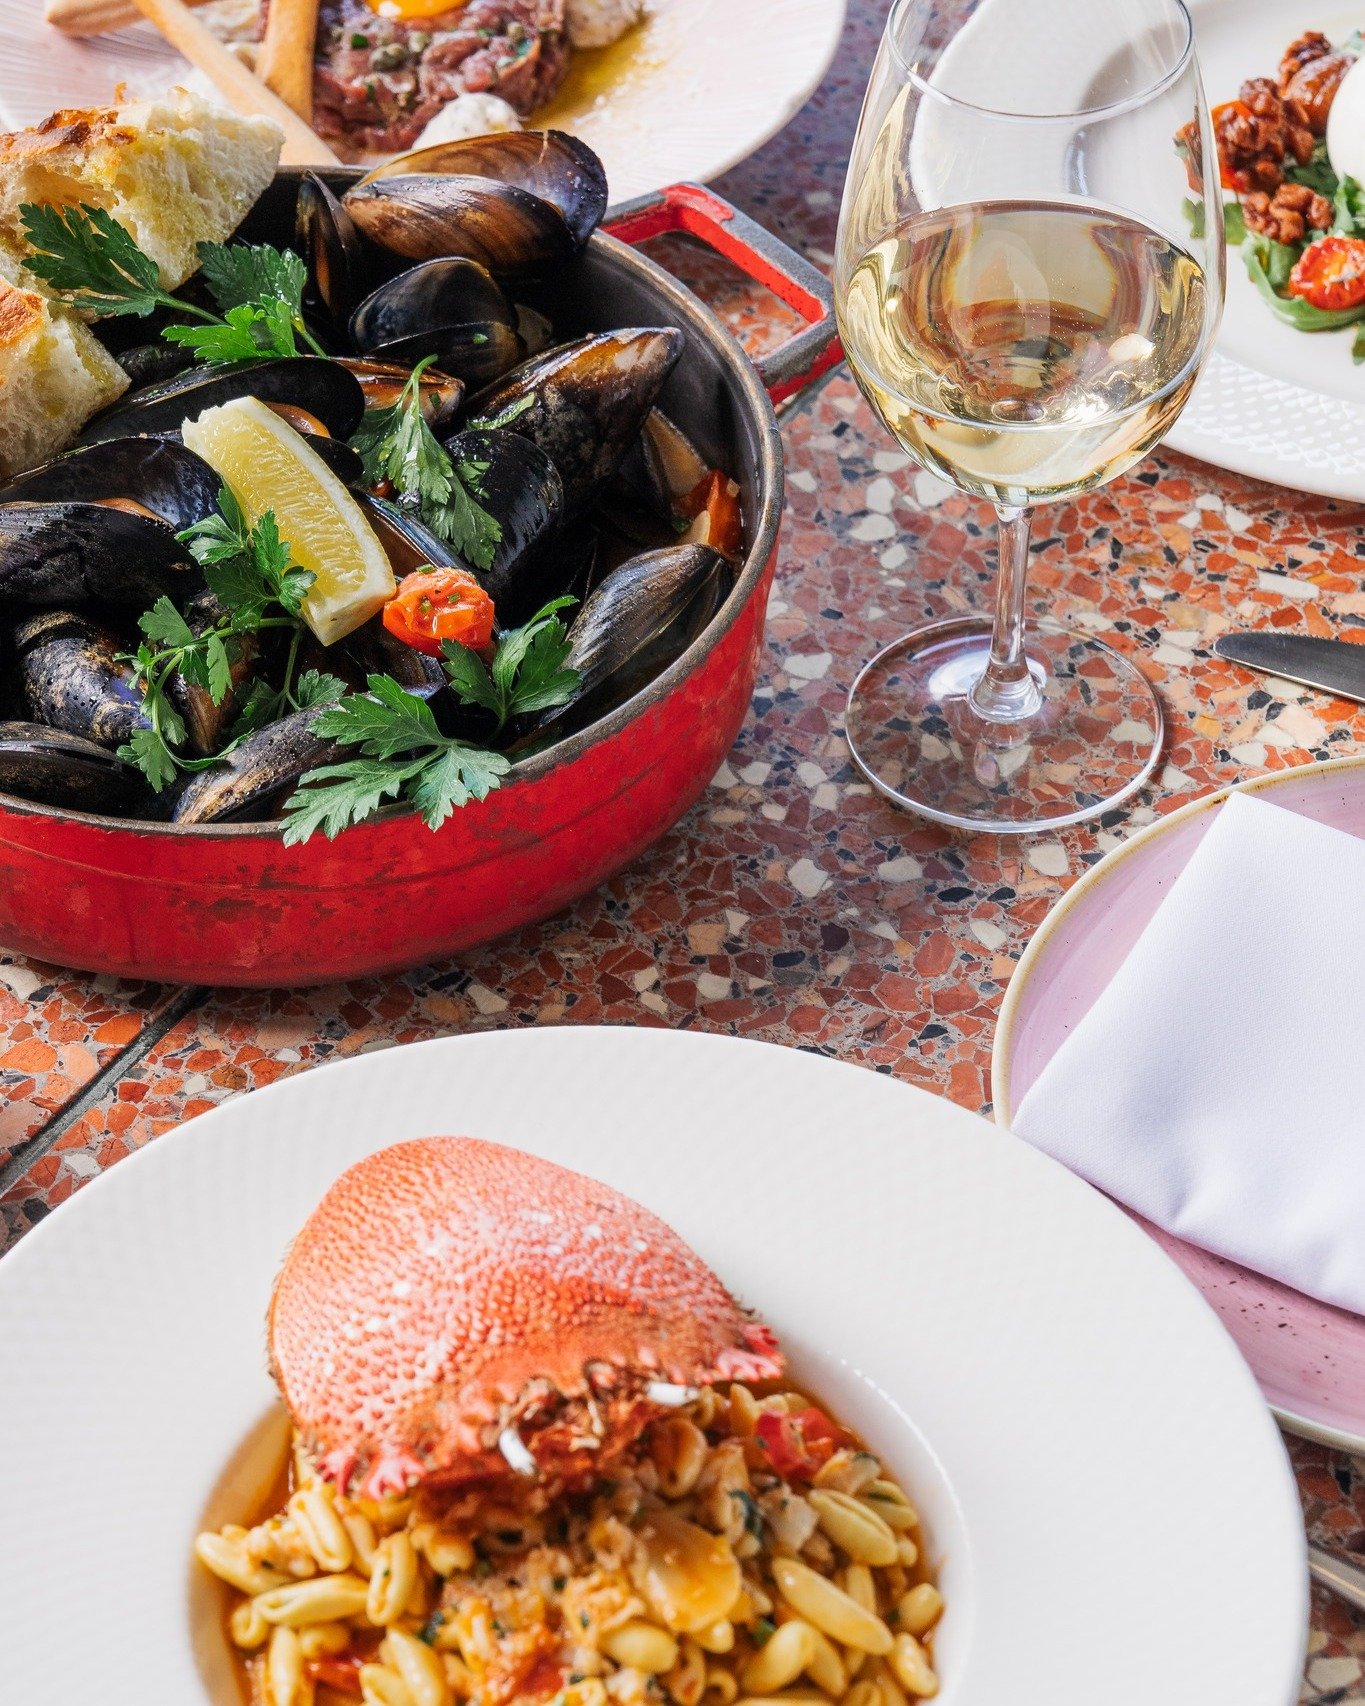 From Tide to Table ~ Join us at Massimo for the freshest seafood 🦀

www.massimorestaurant.com.au/bookings for reservations or call us on (07) 3221 1663
123 Eagle St, Brisbane City QLD 4000

#Italian #MassimoRestaurant #thisisbrisbane #brisbaneitalia